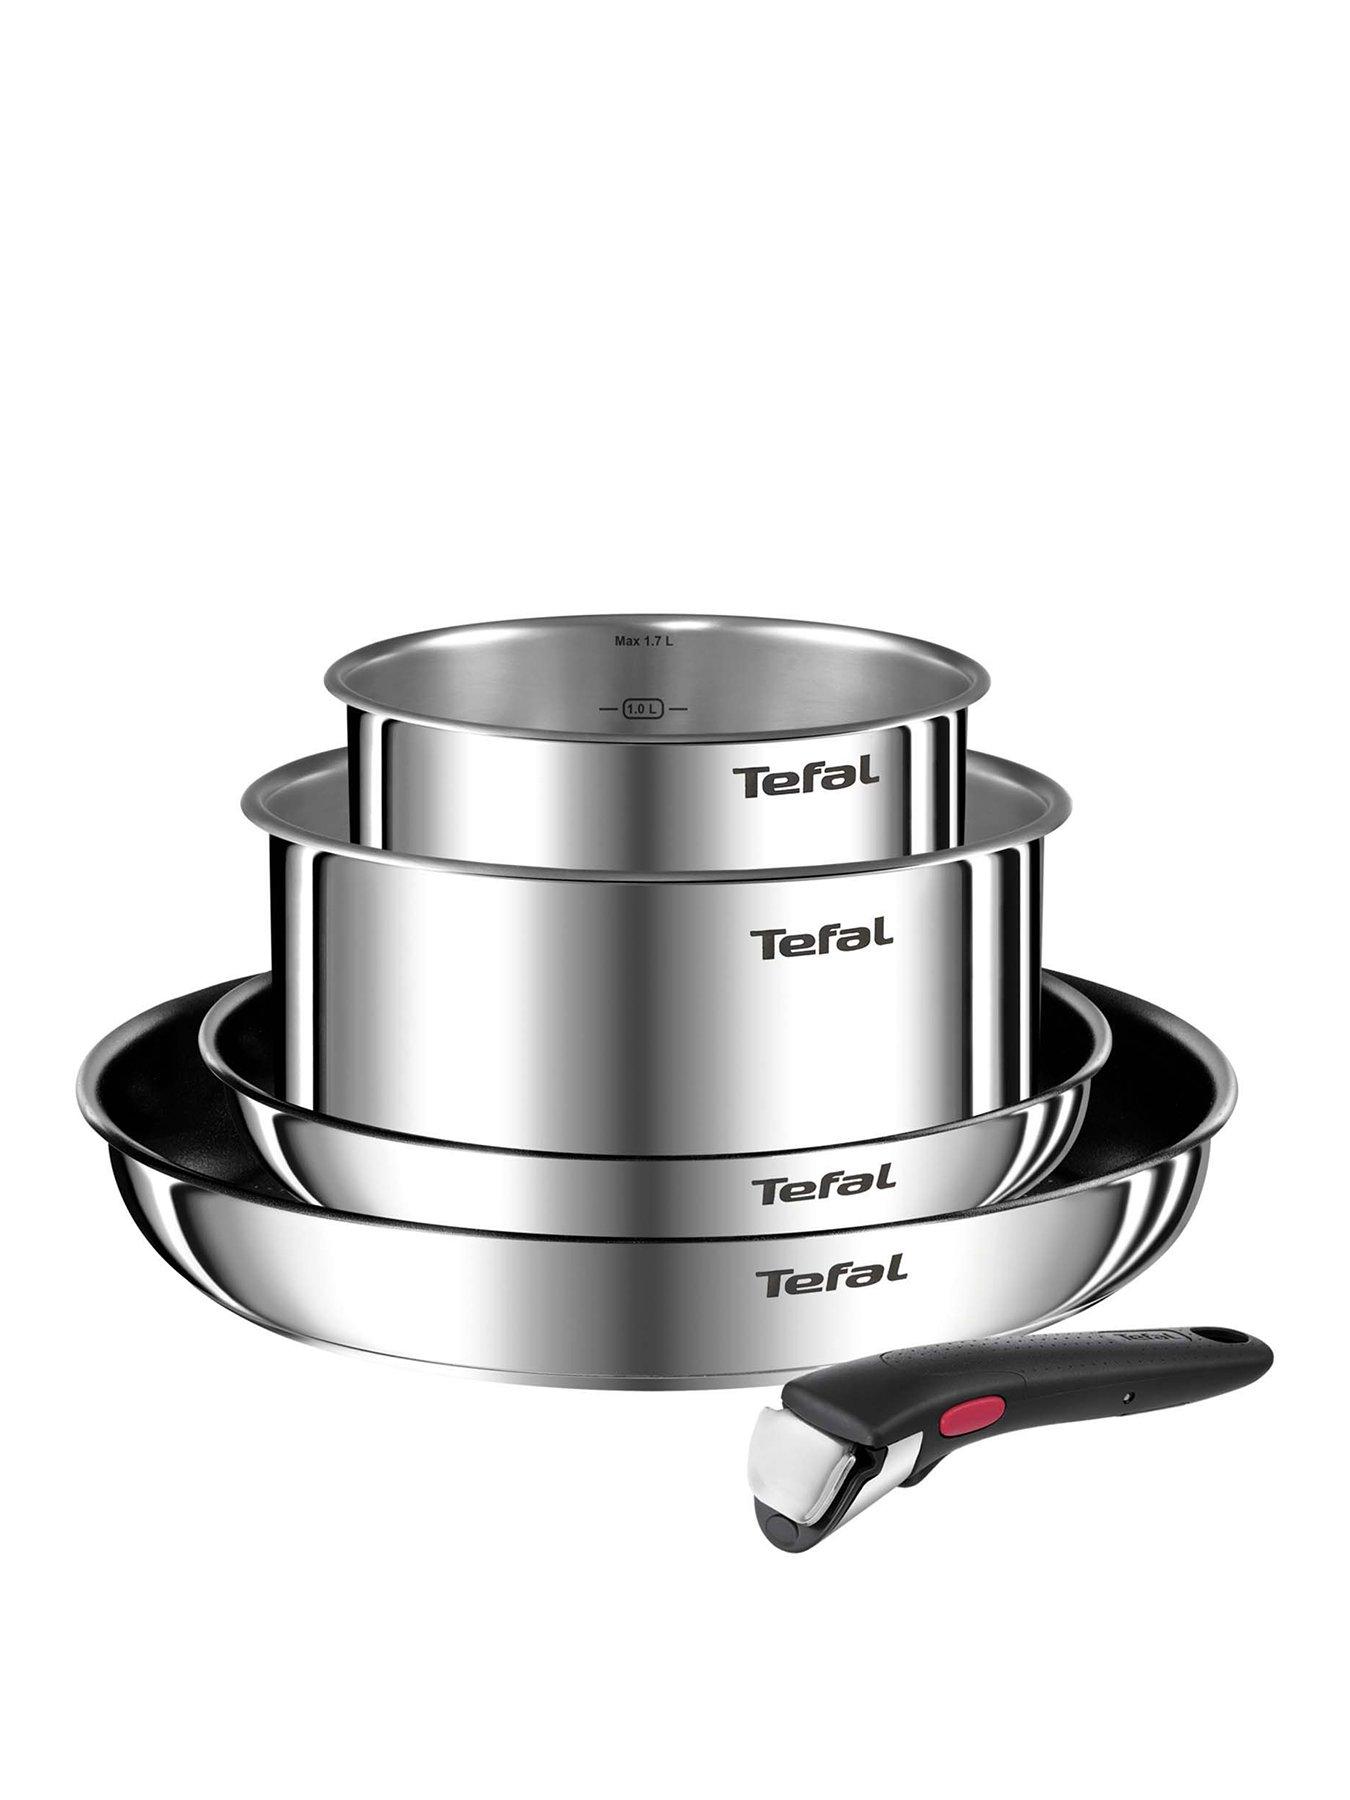 Ingenio Stainless Steel Cookware Set 4 Piece Induction Stackable, Removable Handle Pots and Pans, Dishwasher Safe Silver - None